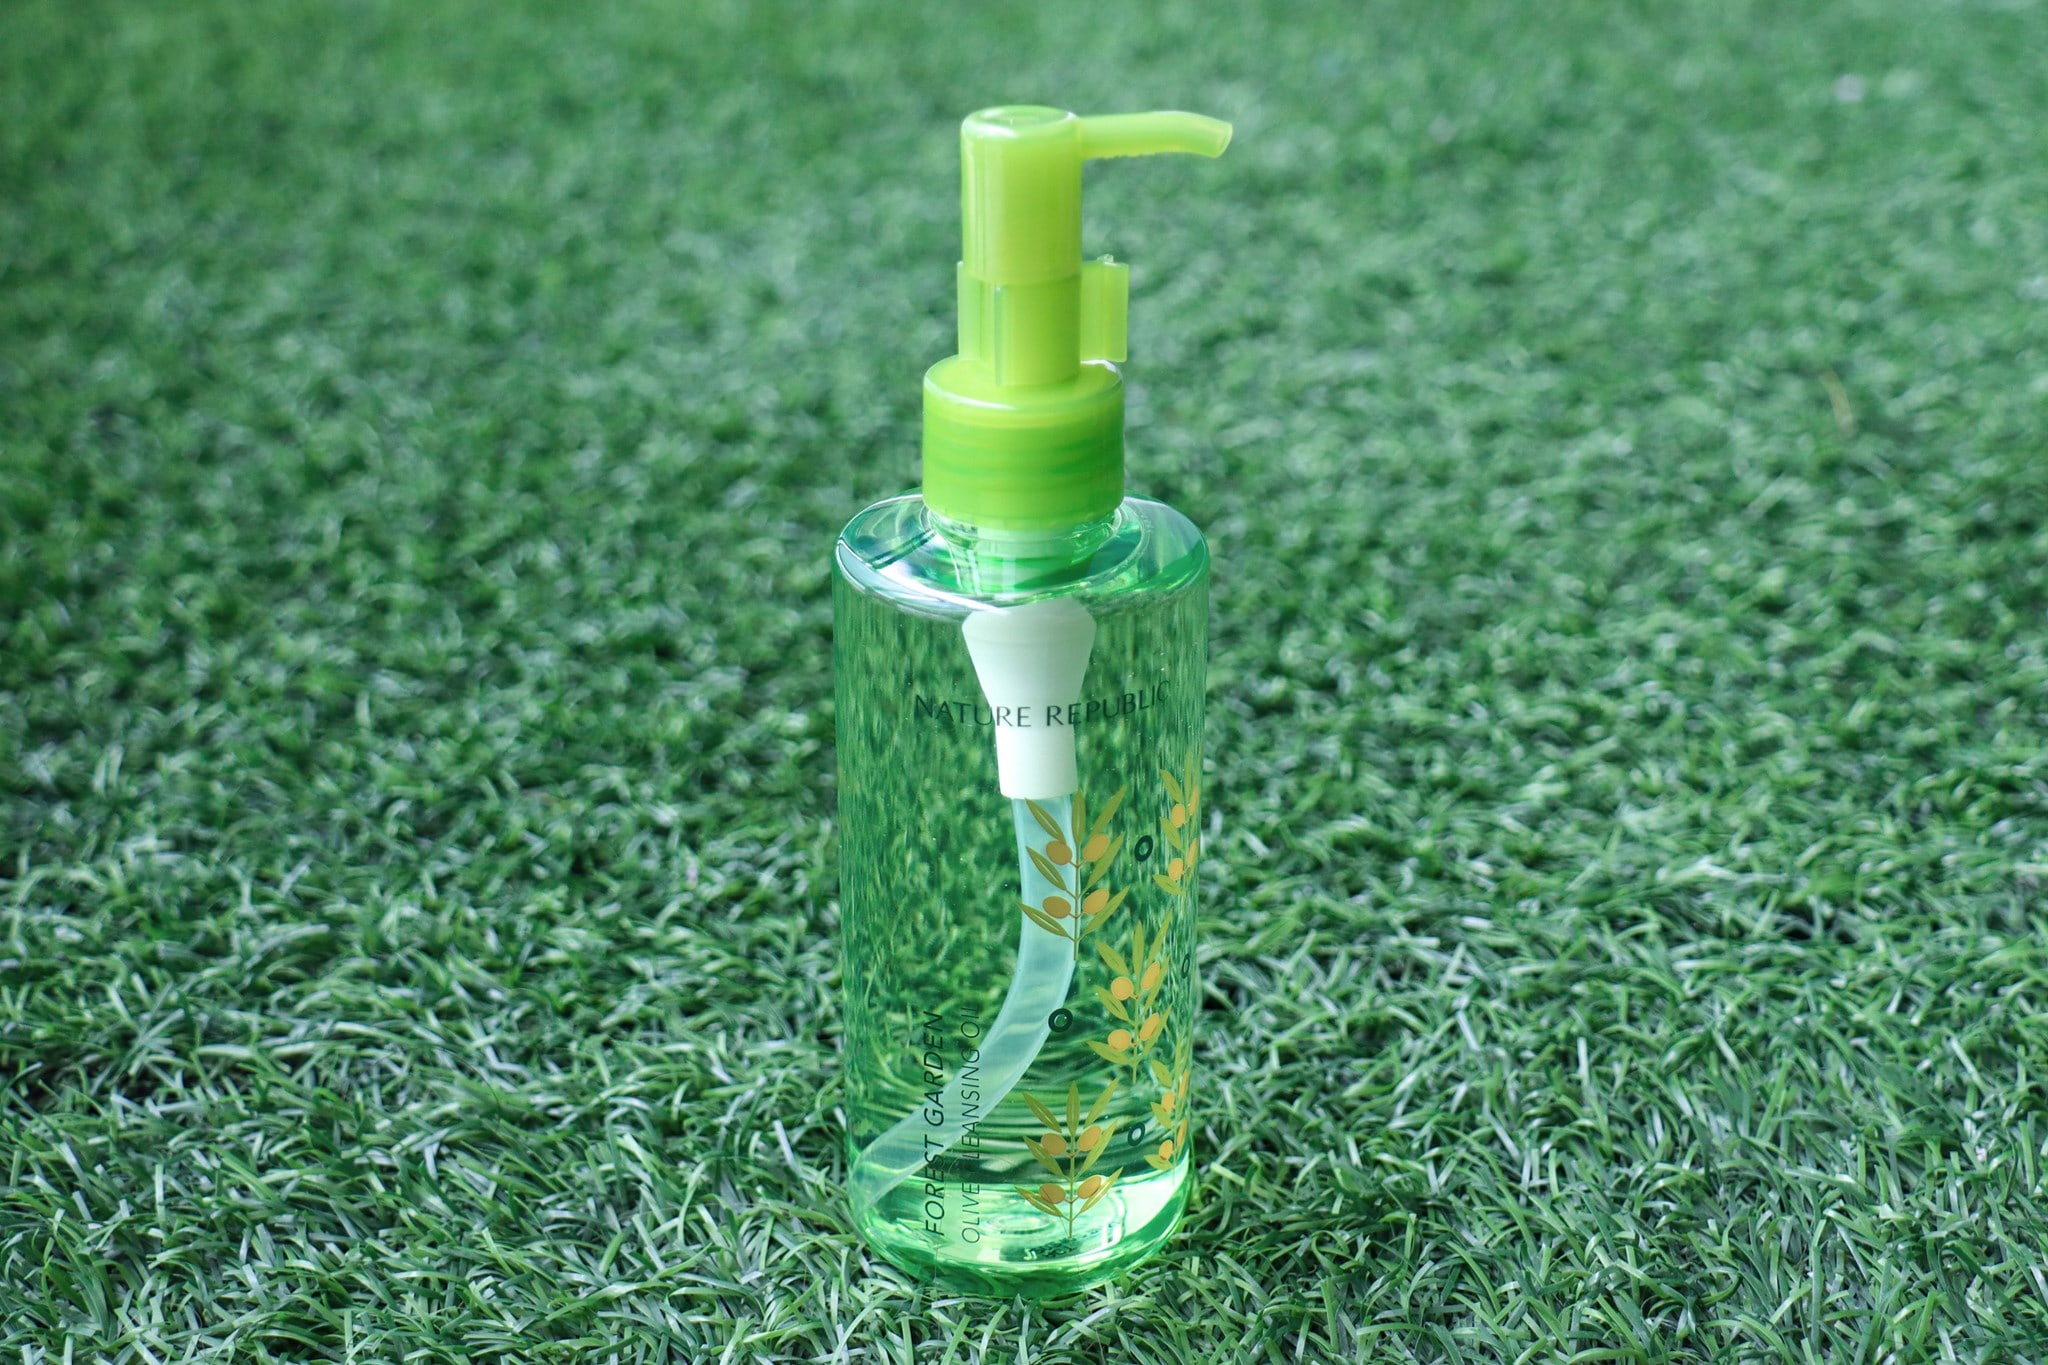 Nature Republic Forest Garden Cleansing Oil